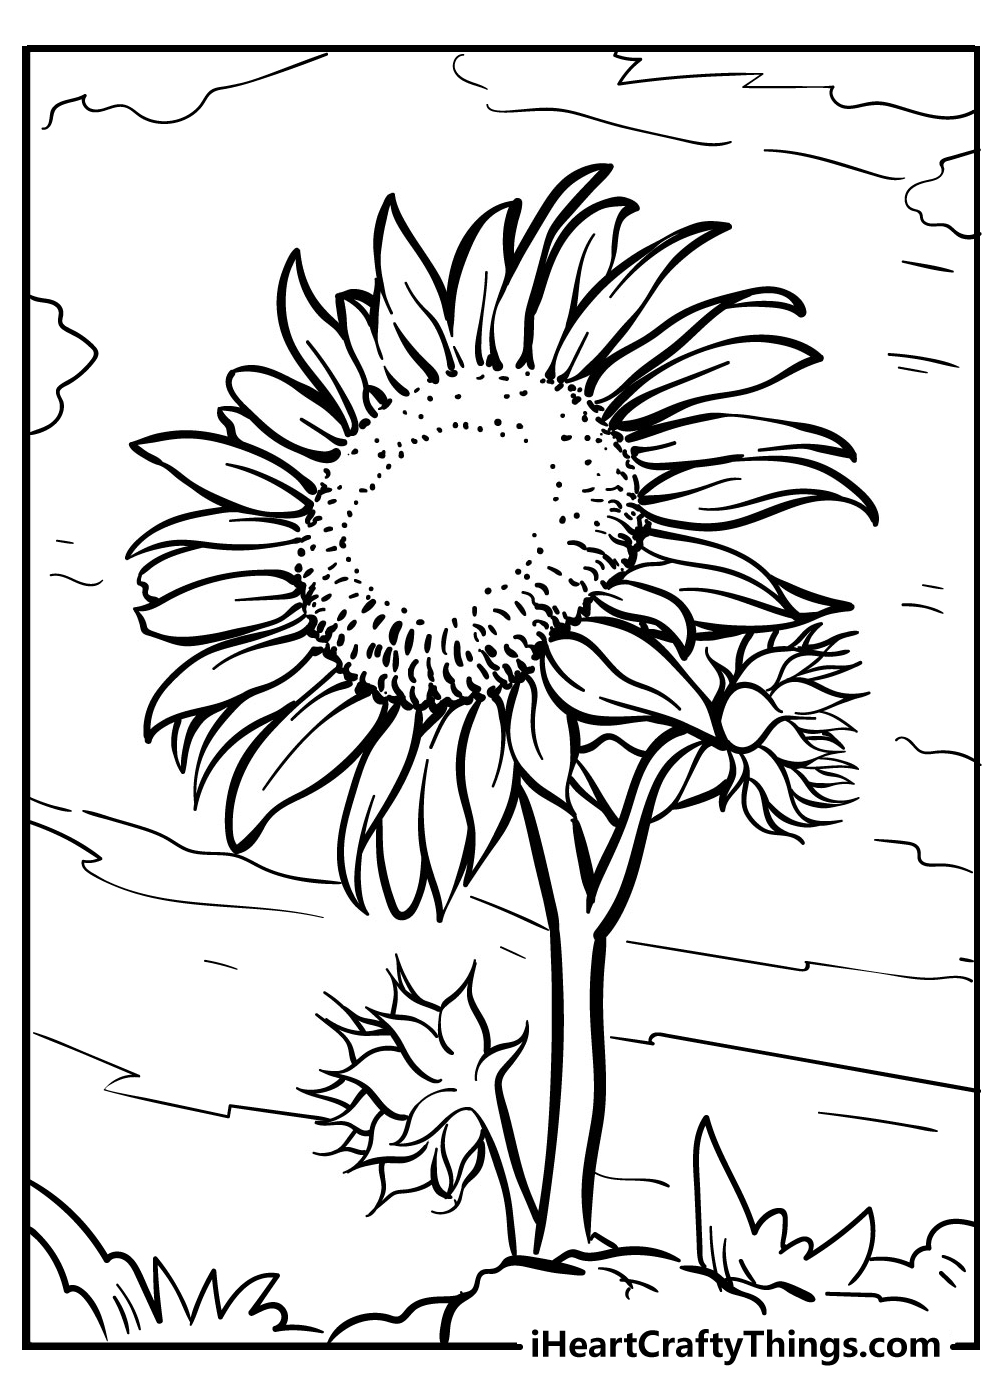 Sunflower coloring pages free printables